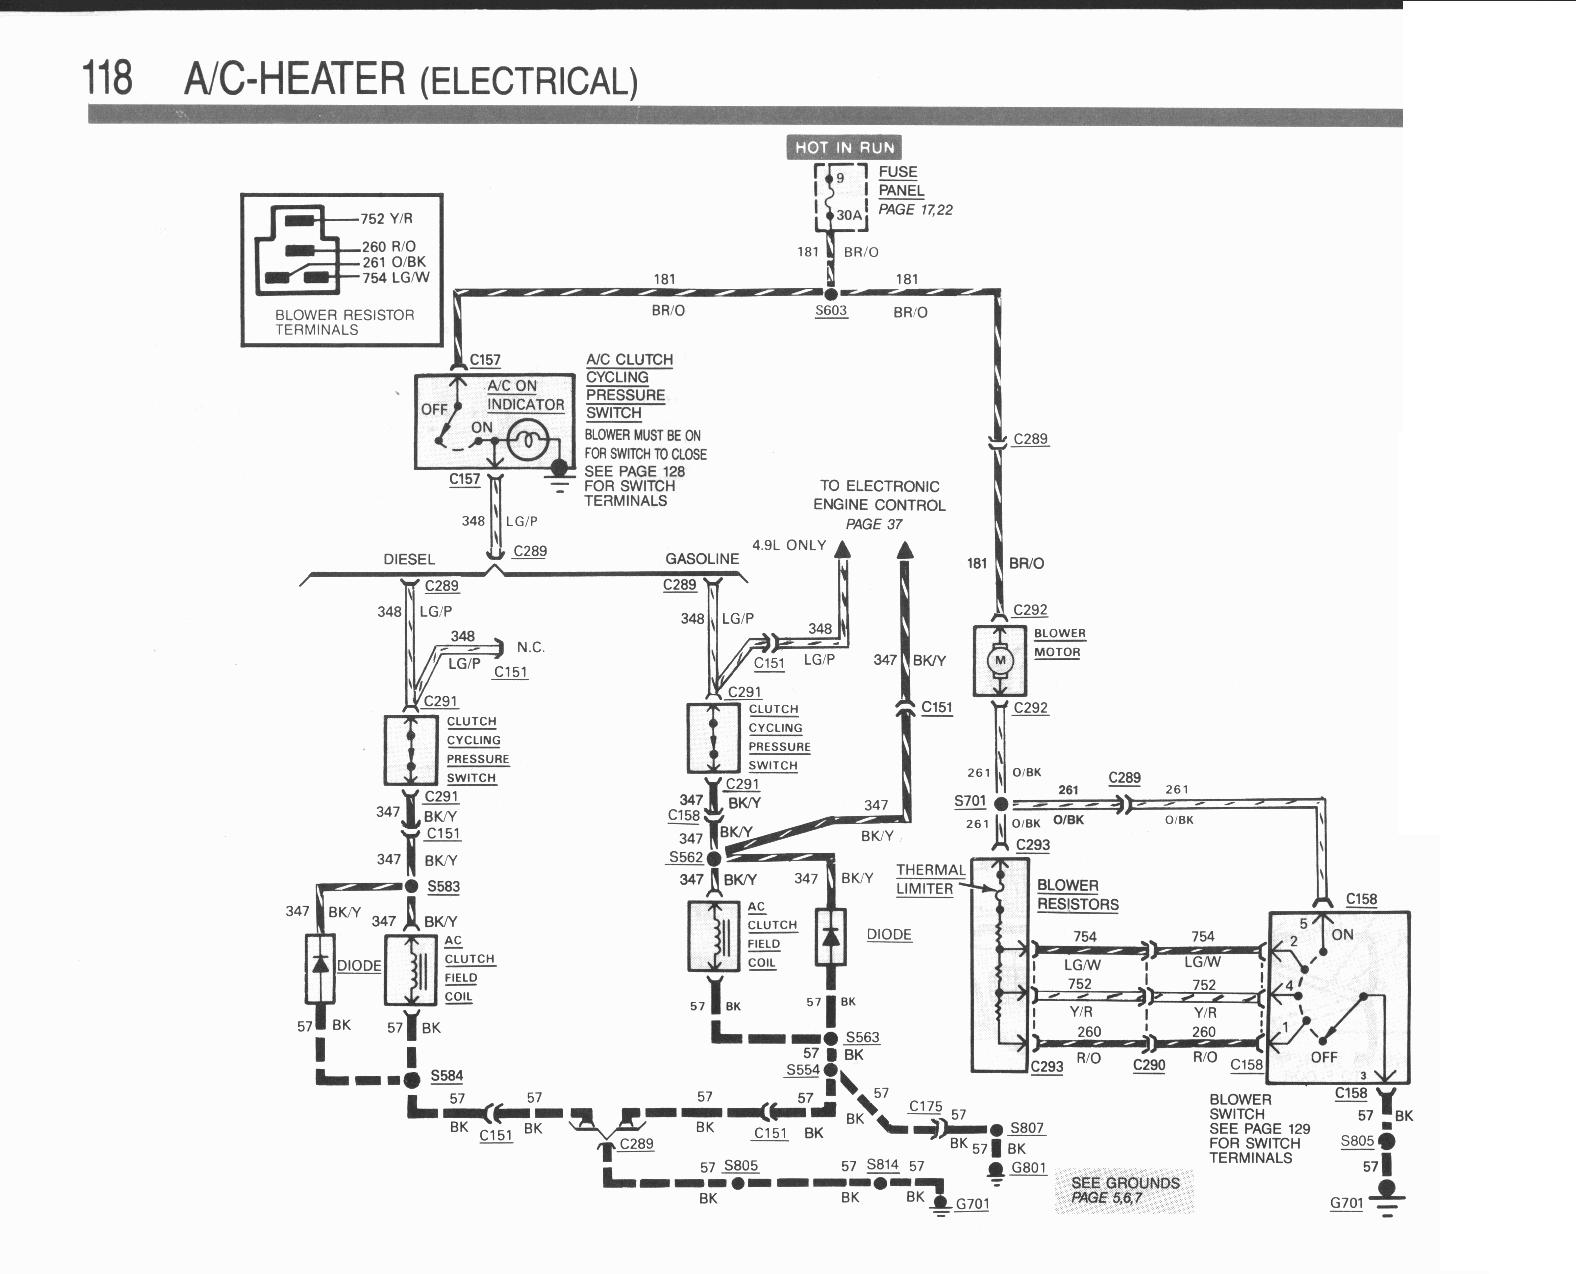 Heater-A/C Control Wiring Diagram - Ford Truck Enthusiasts Forums